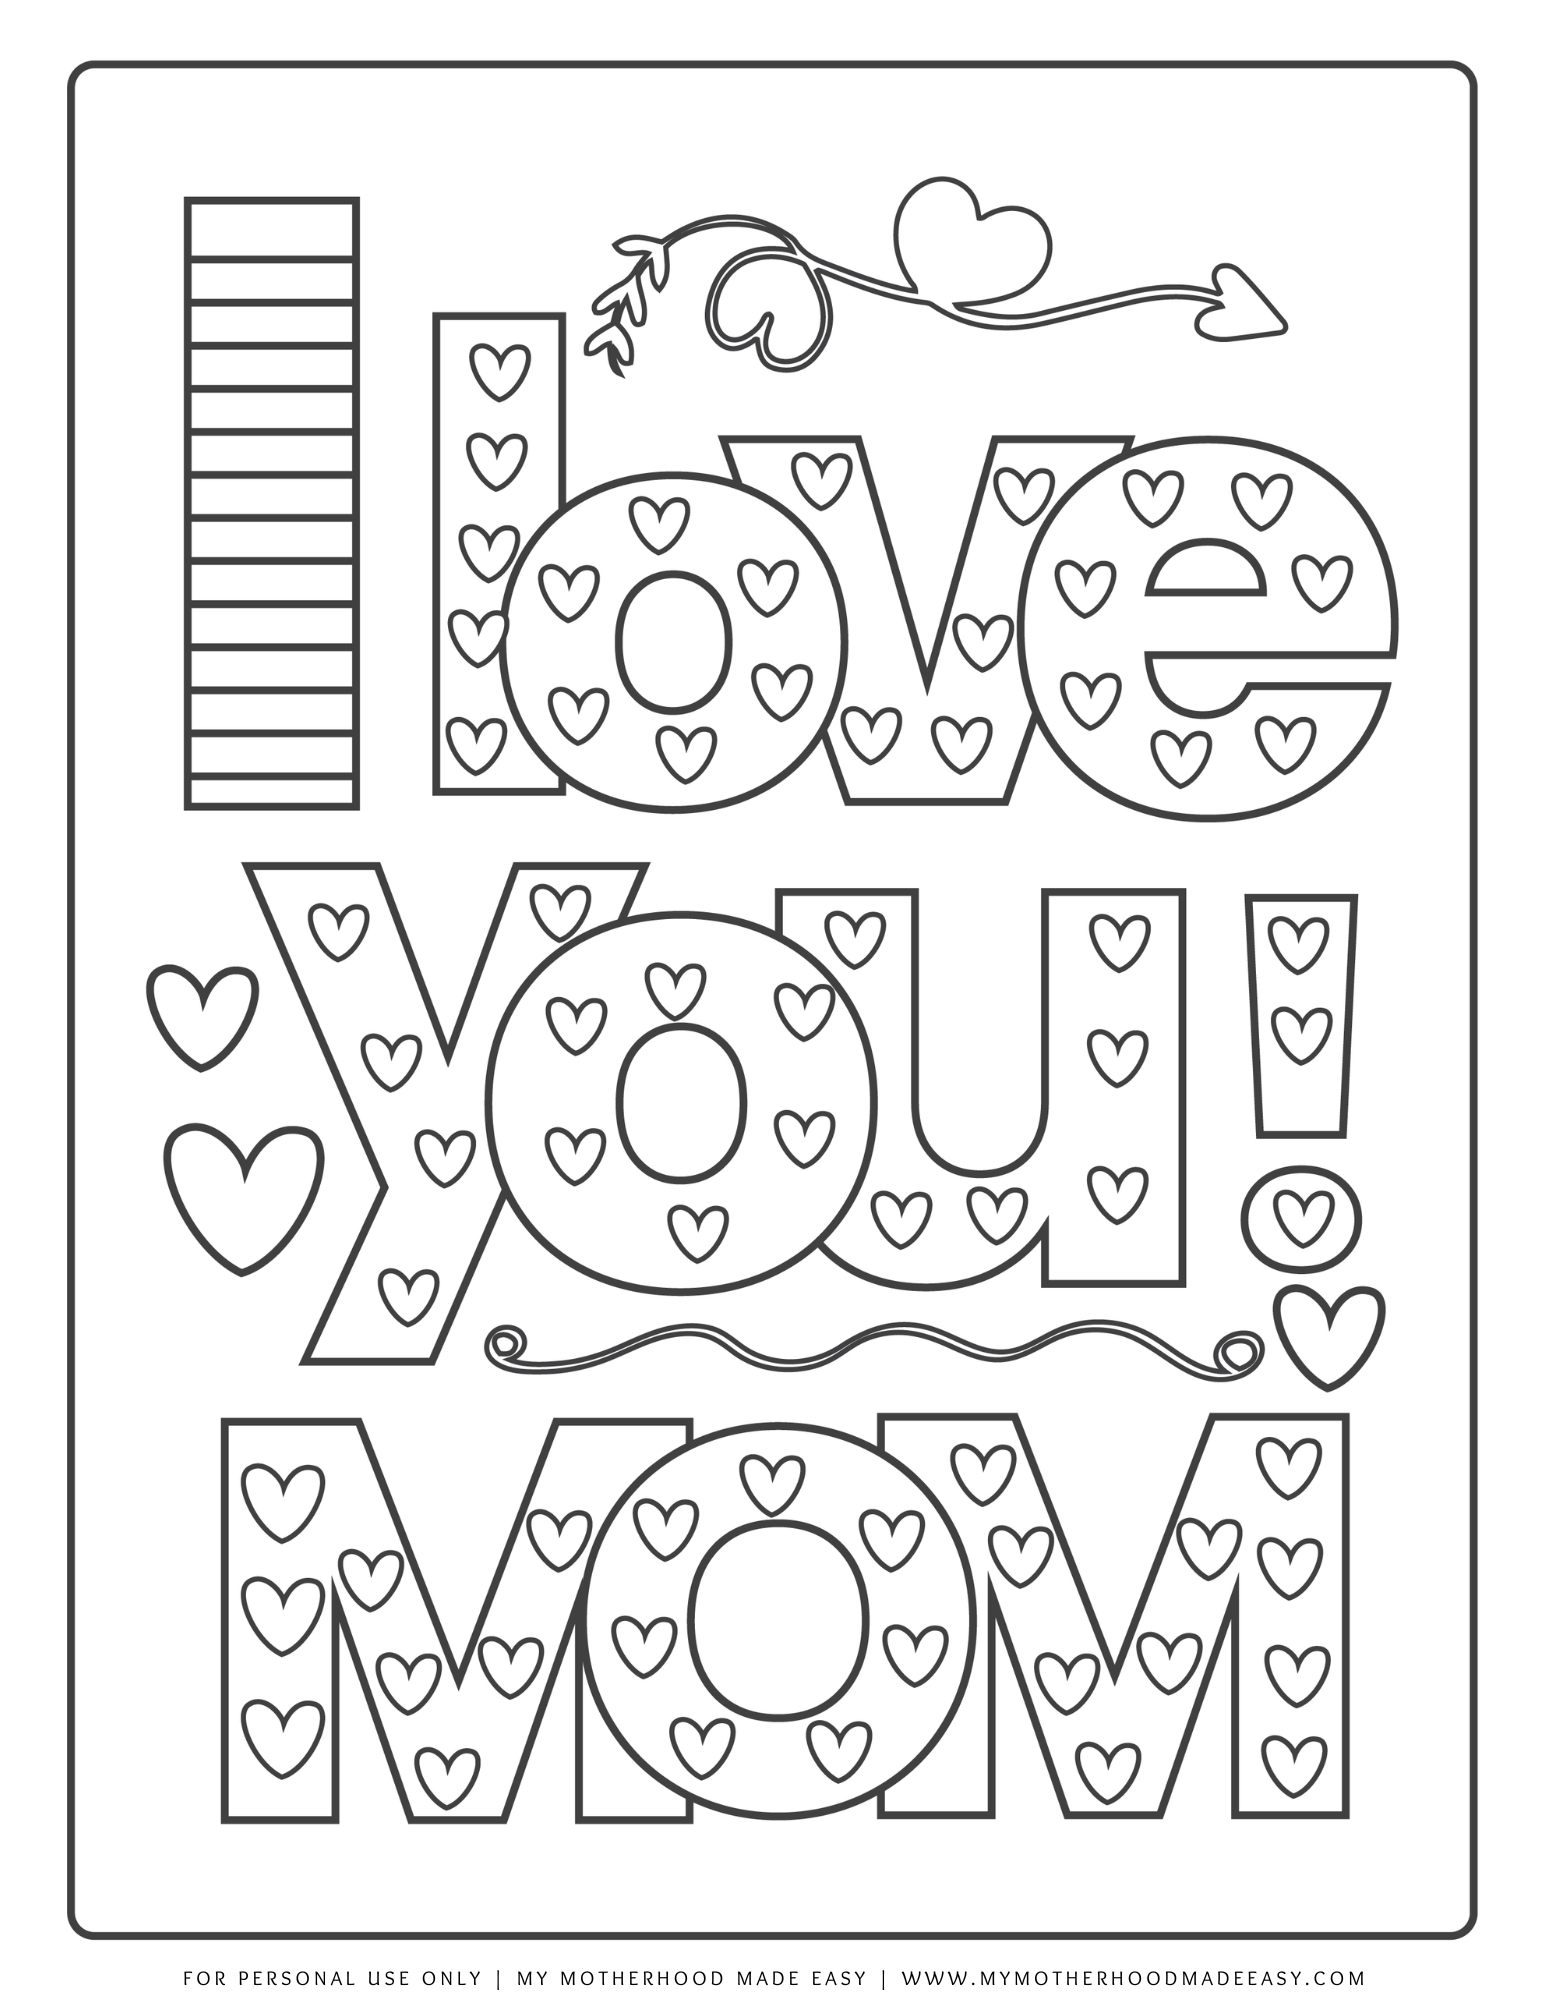 Free printable Mother’s day coloring pages